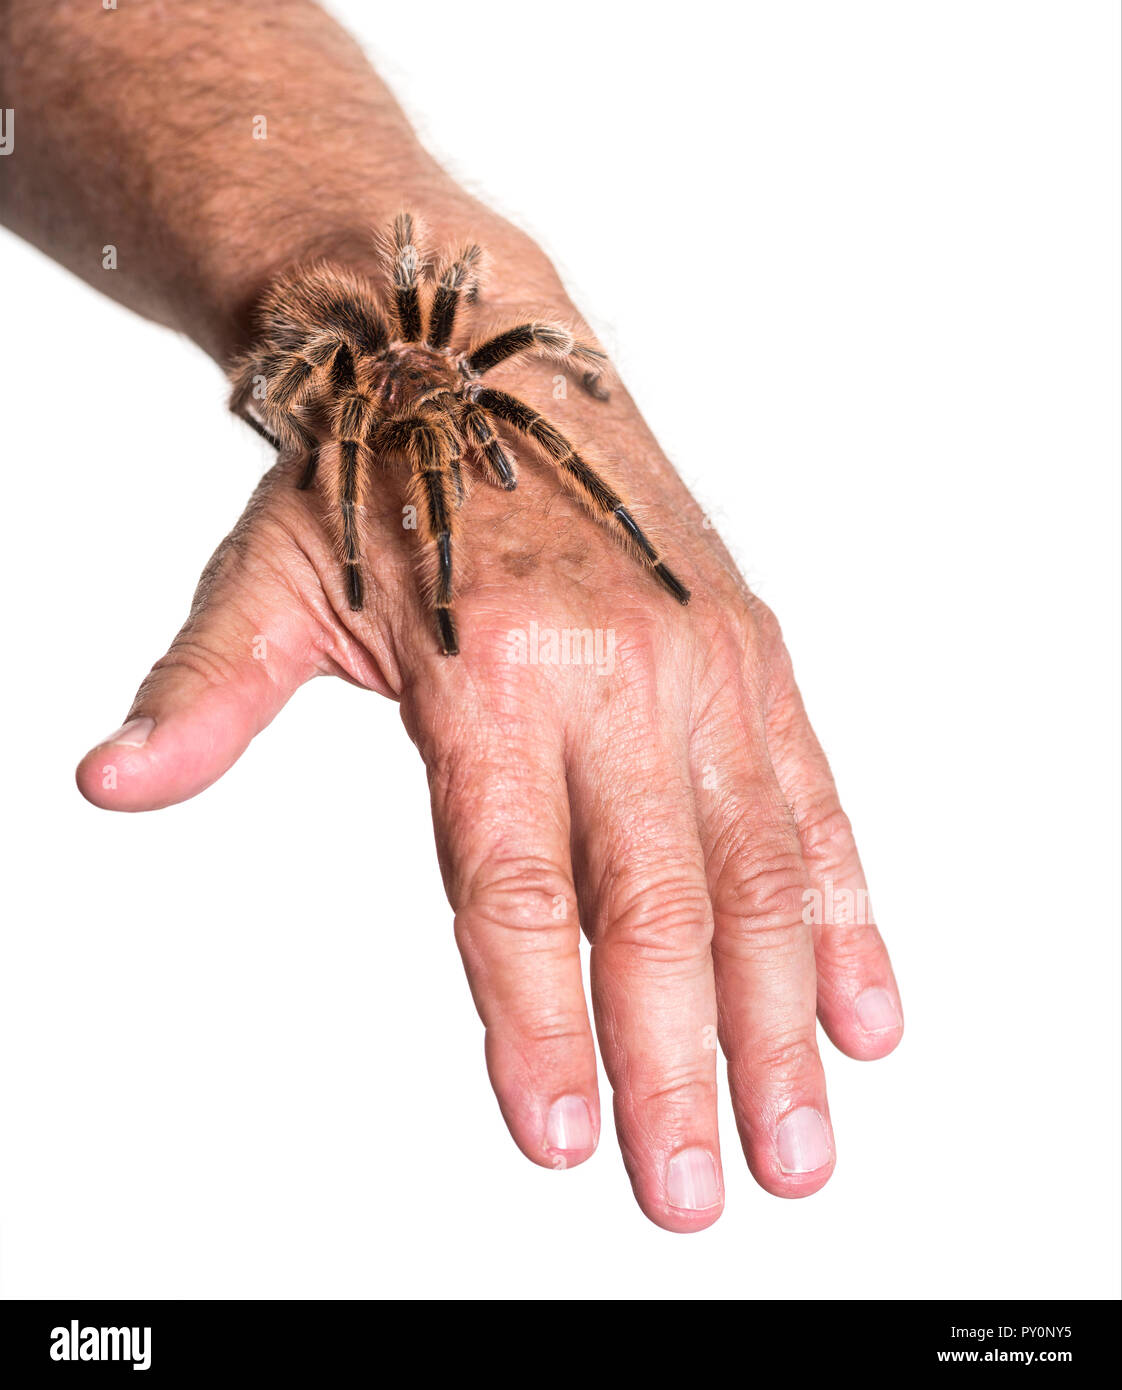 Tarantula on persons hand against white background Stock Photo